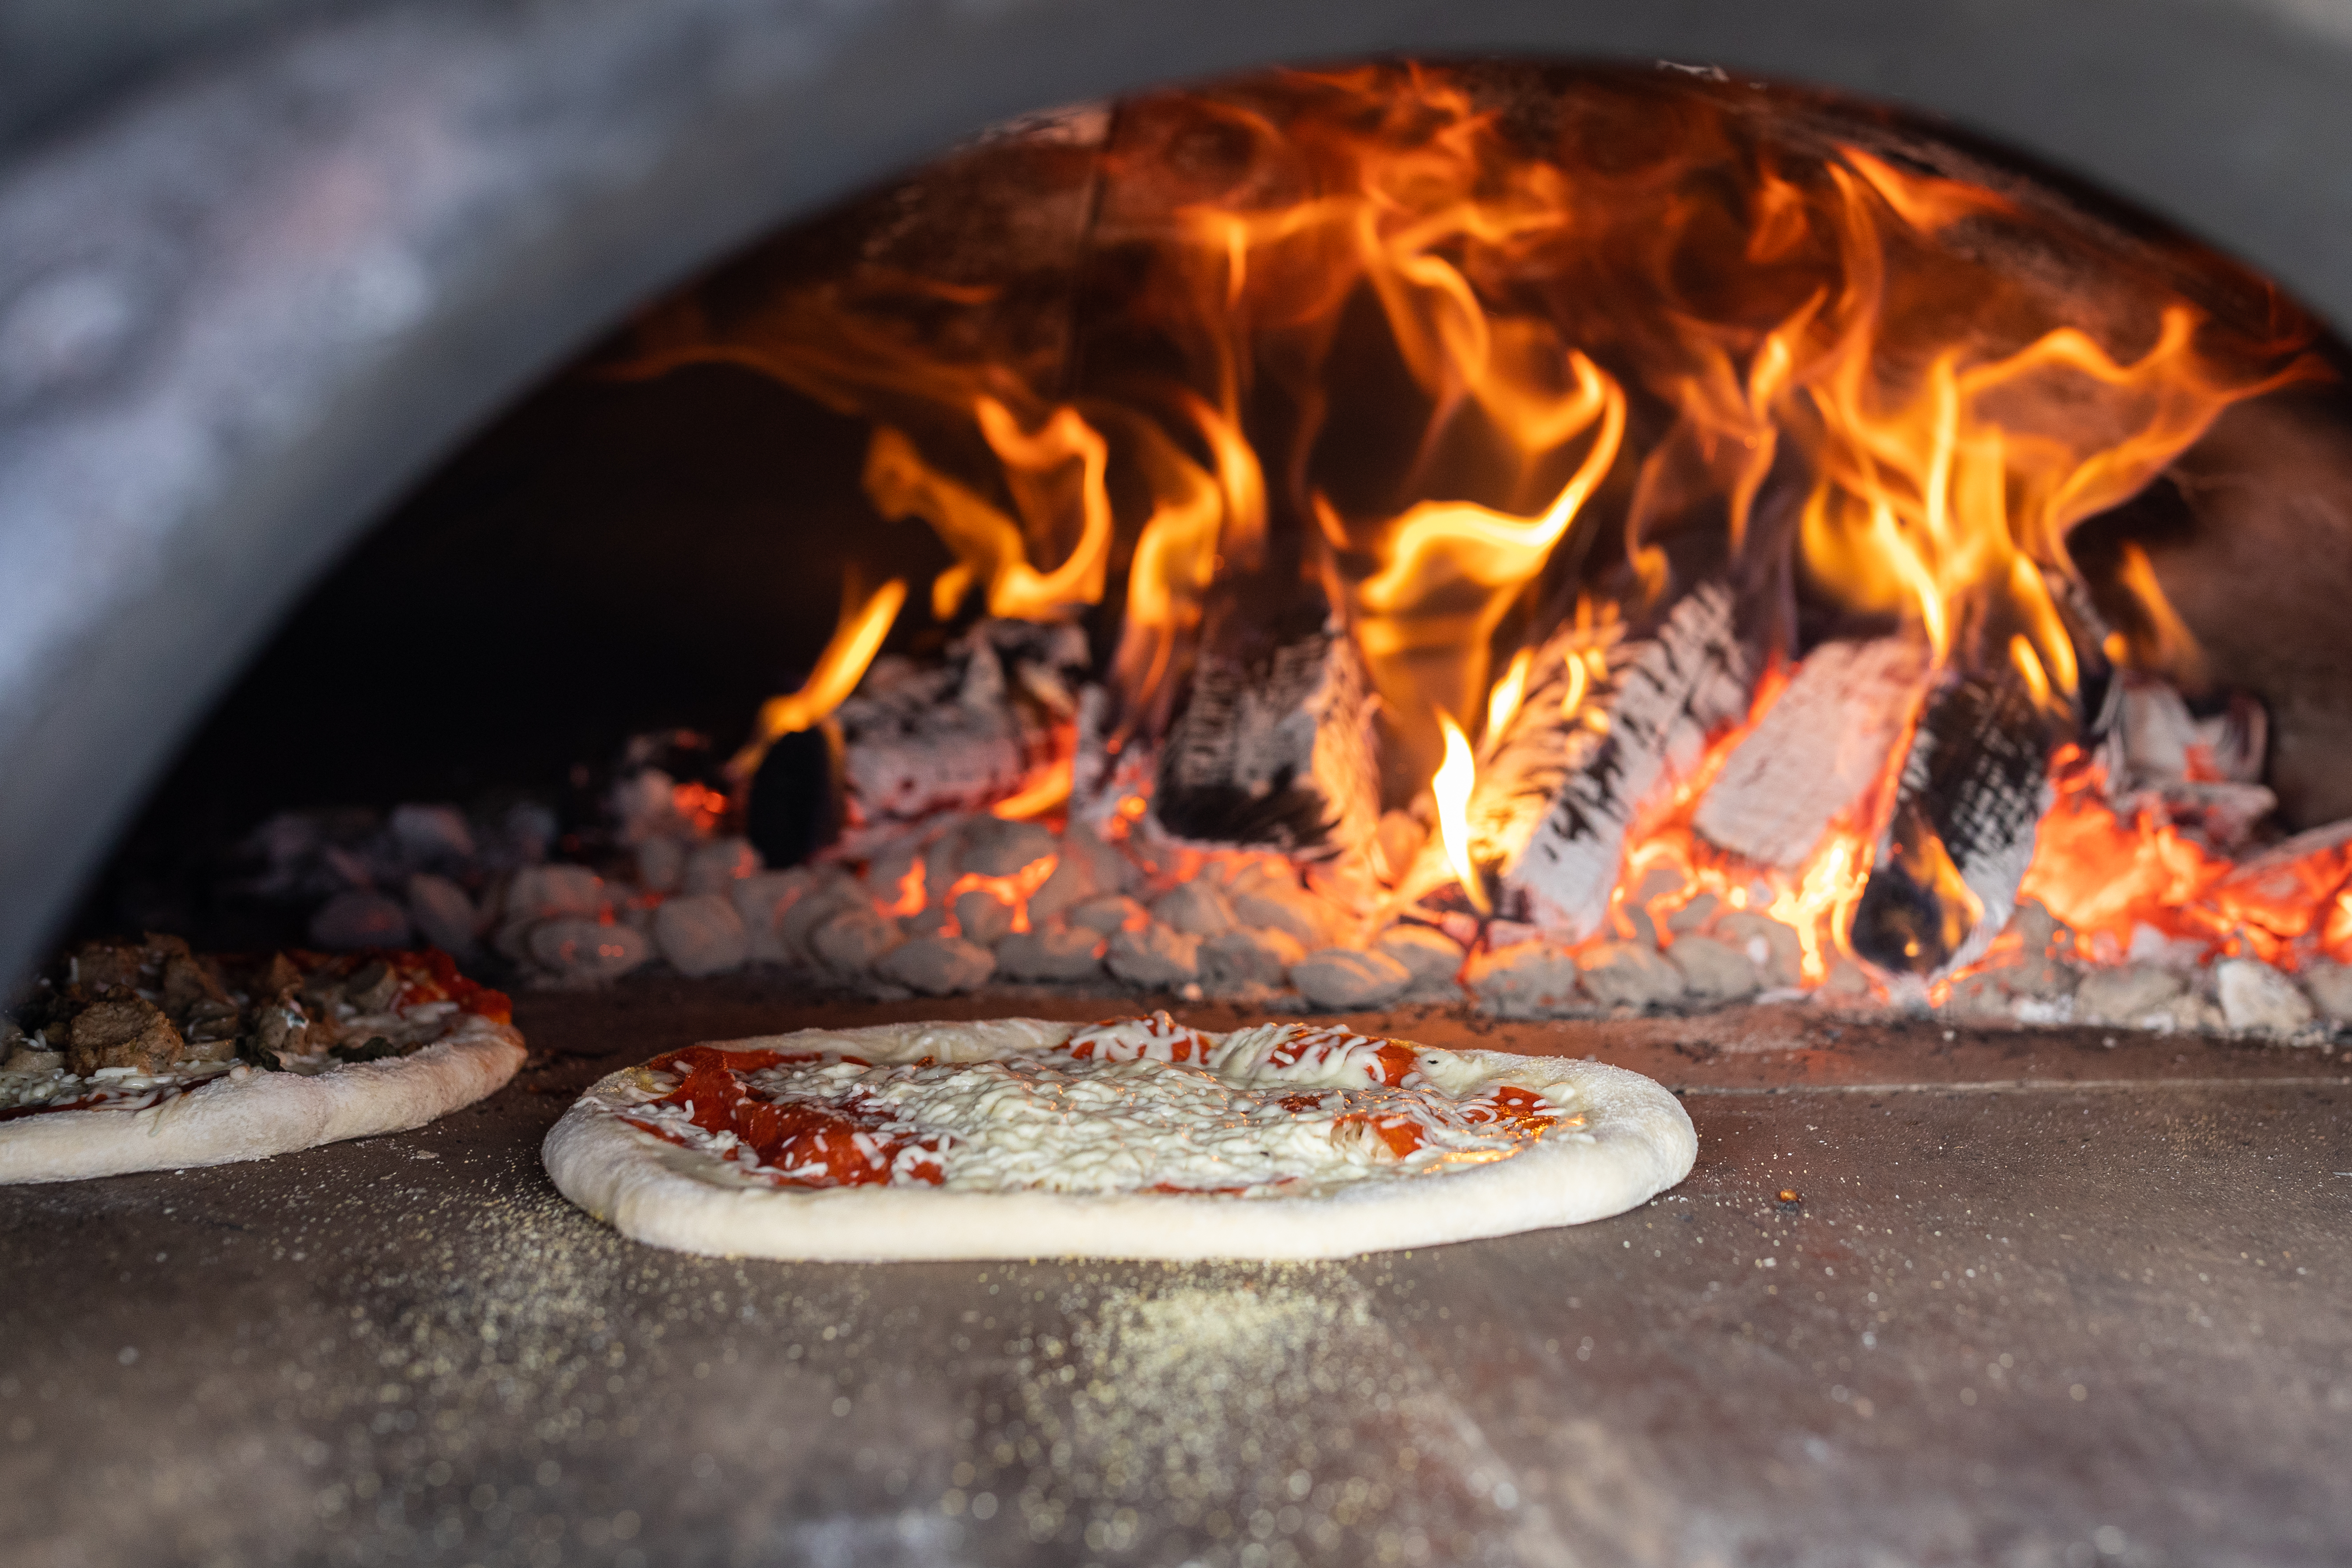 Two pizzas cook inside an outdoor pizza oven retired Middleton Police Chief Jim DiGianvittorio got from Italy.